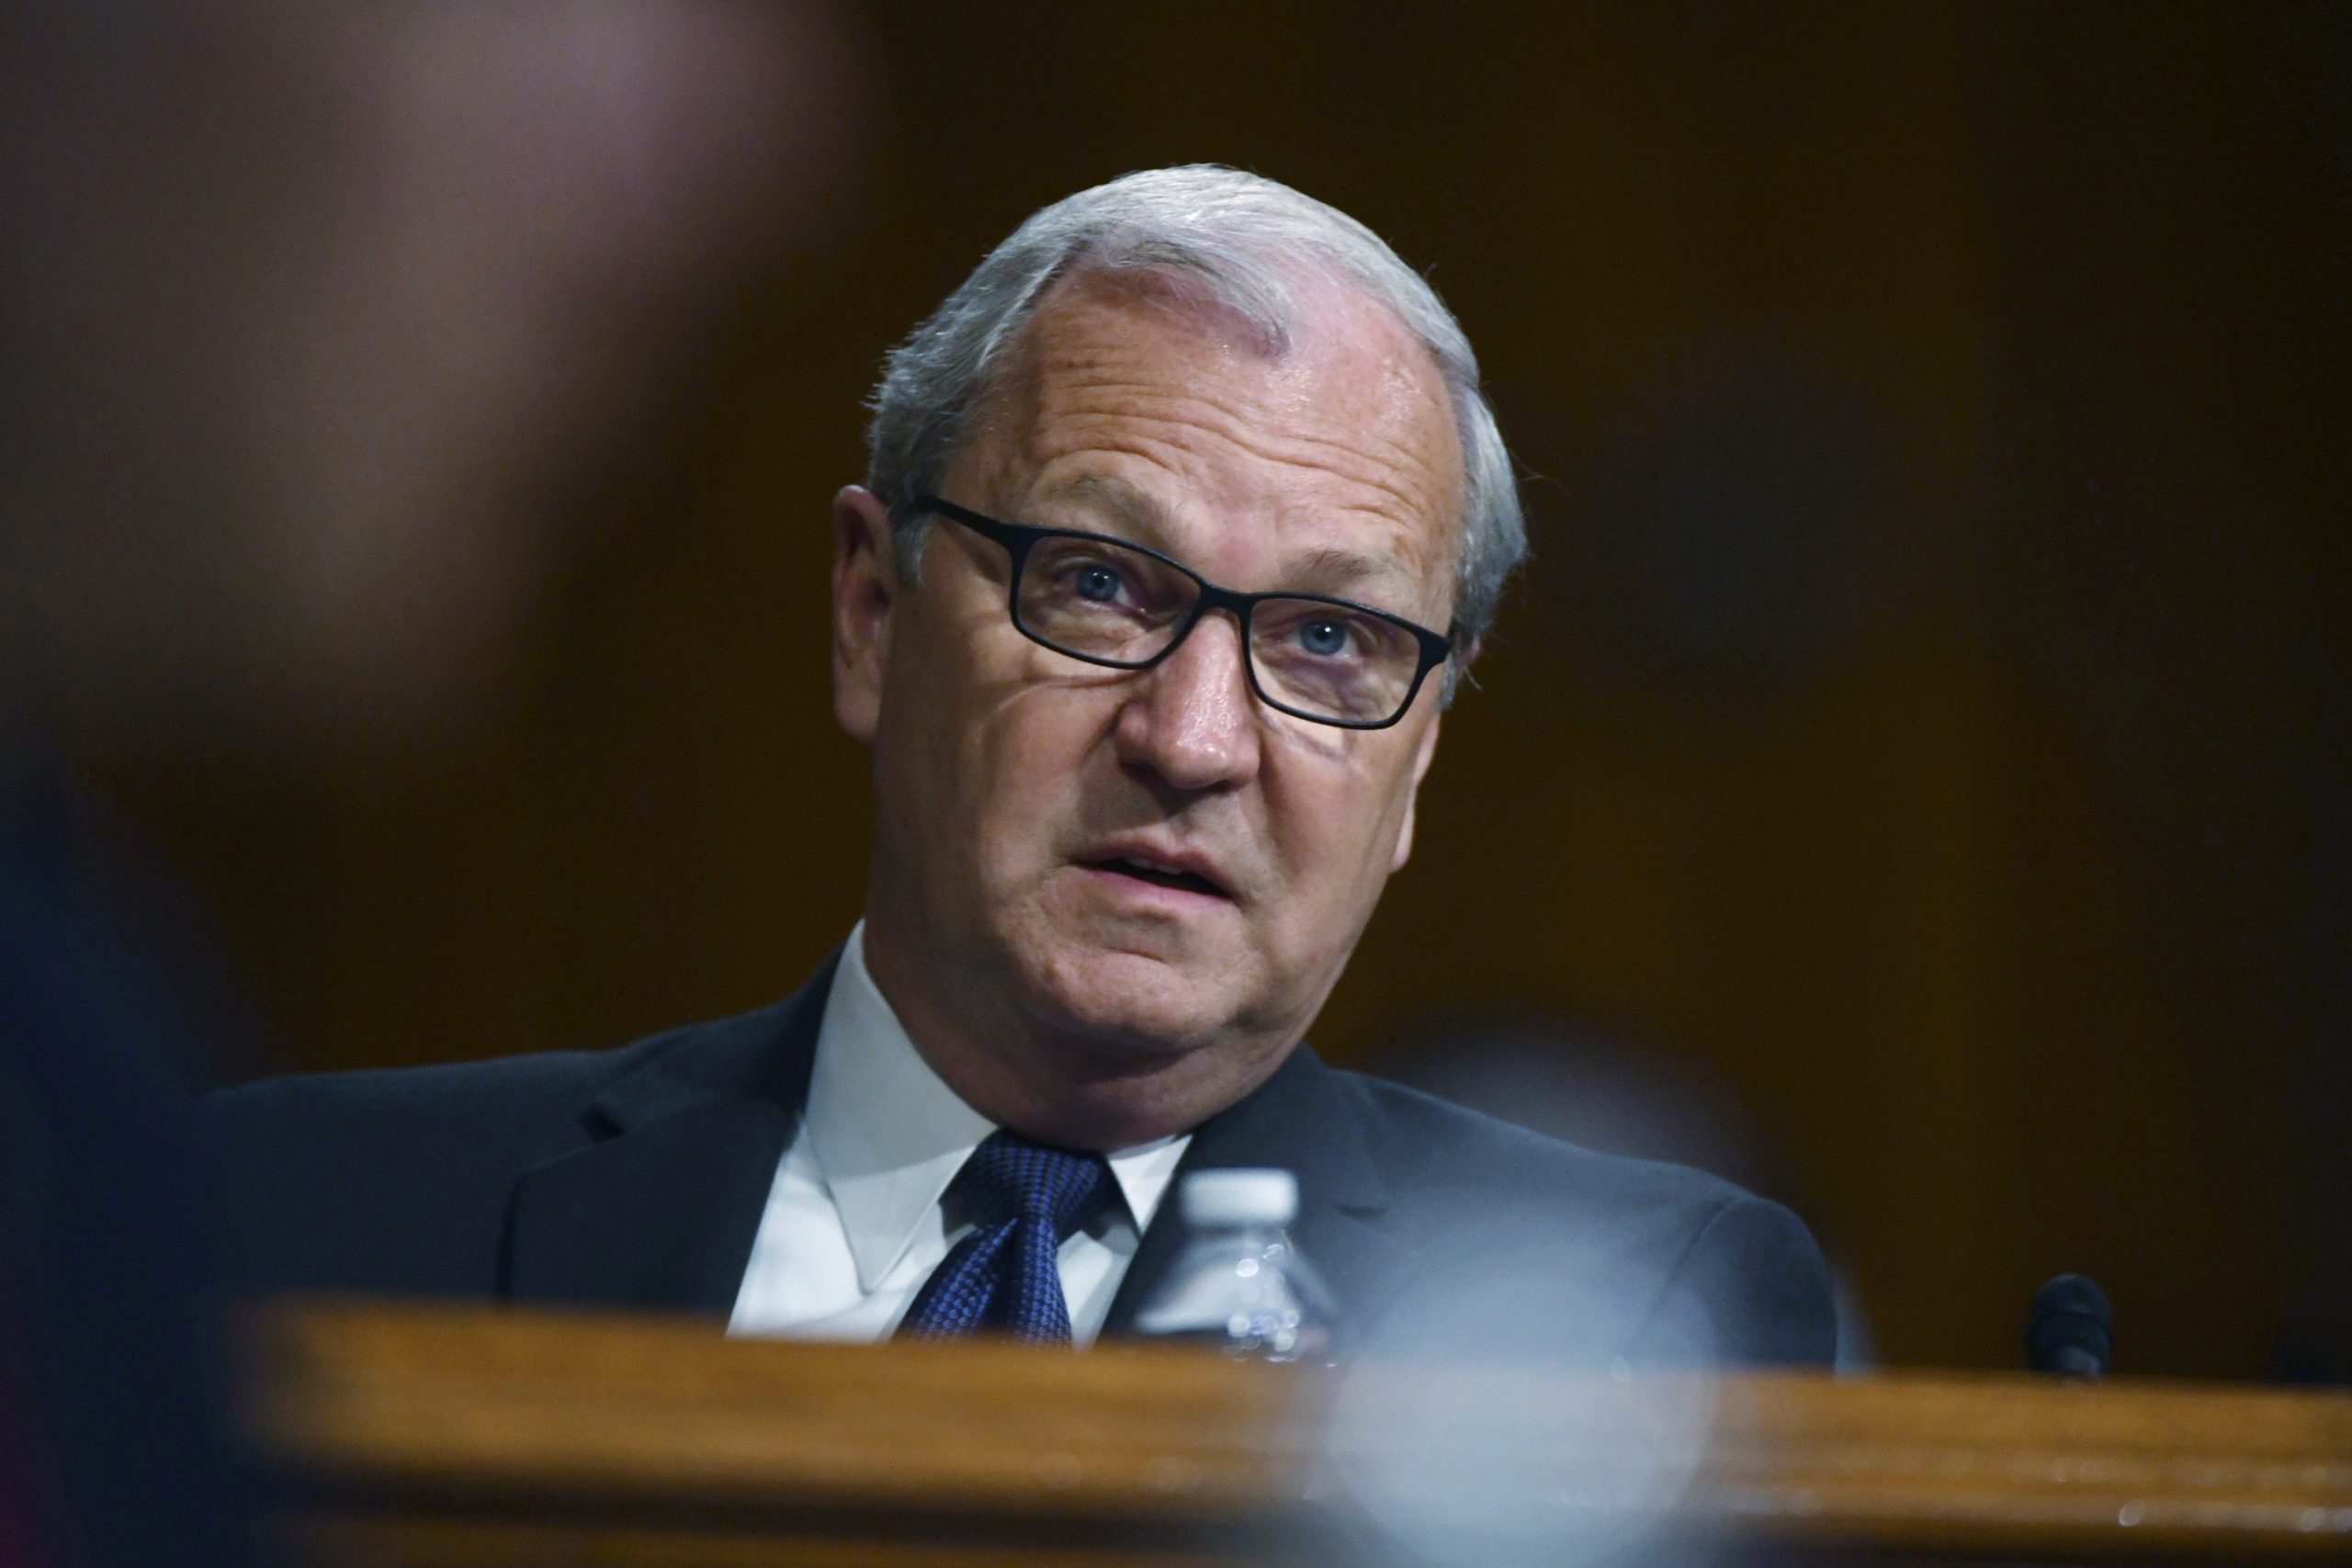 Sen. Kevin Cramer speaks during a hearing on Capitol Hill in Washington, D.C, on May 20, 2020. Cramer's 42-year-old son was involved in a police car chase on Wednesday that resulted in the death of a sheriff's deputy.